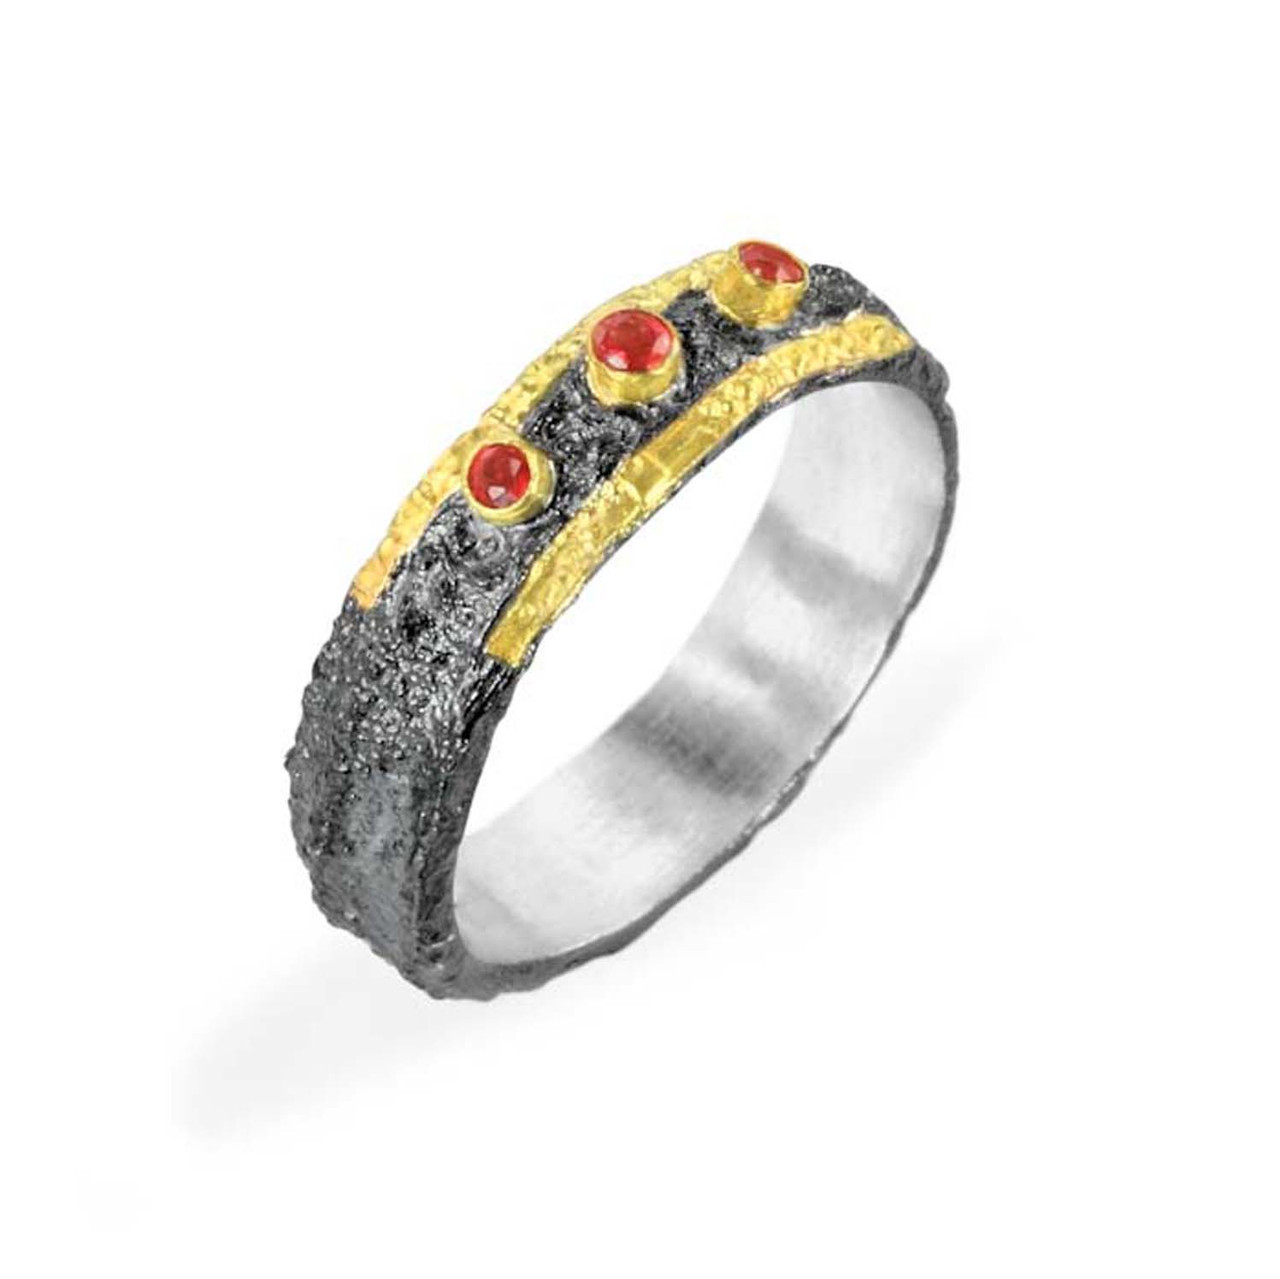 Oxidised Silver, Gold & Triple Ruby Ring, Apostolos, tomfoolery